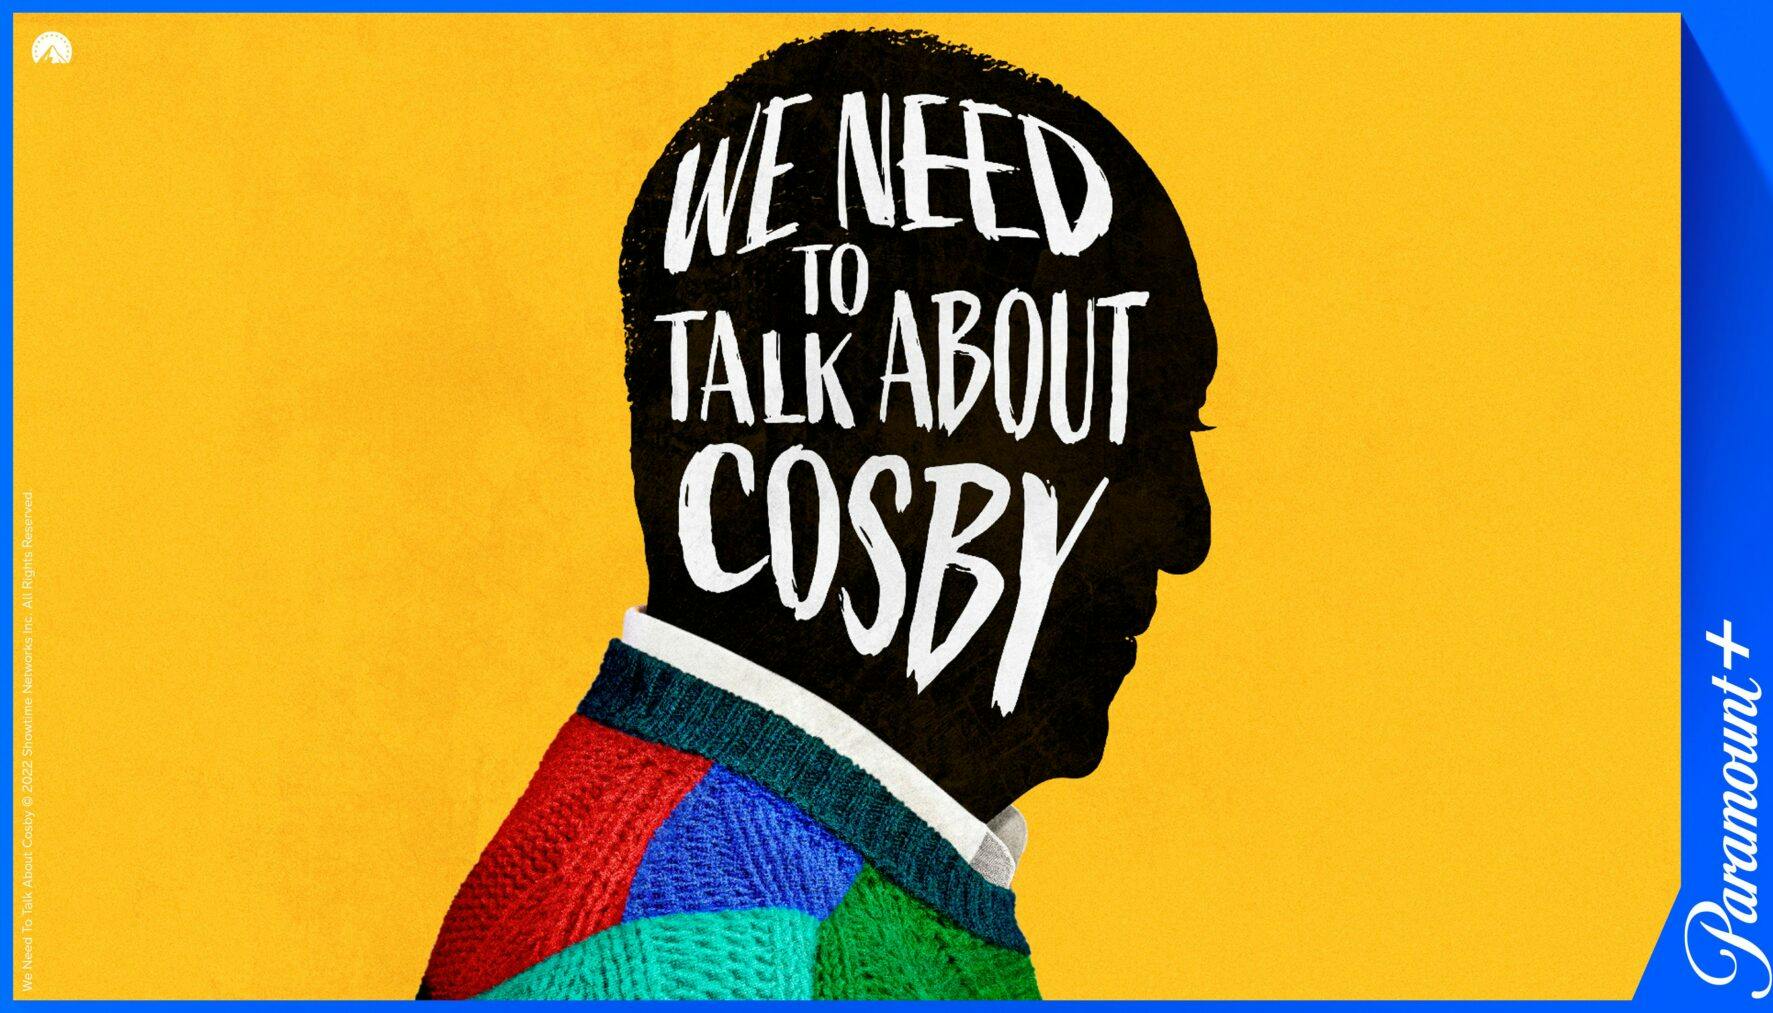 https://imgix.vielskerserier.dk/2022/02/We-Need-to-Talk-About-Cosby.jpeg